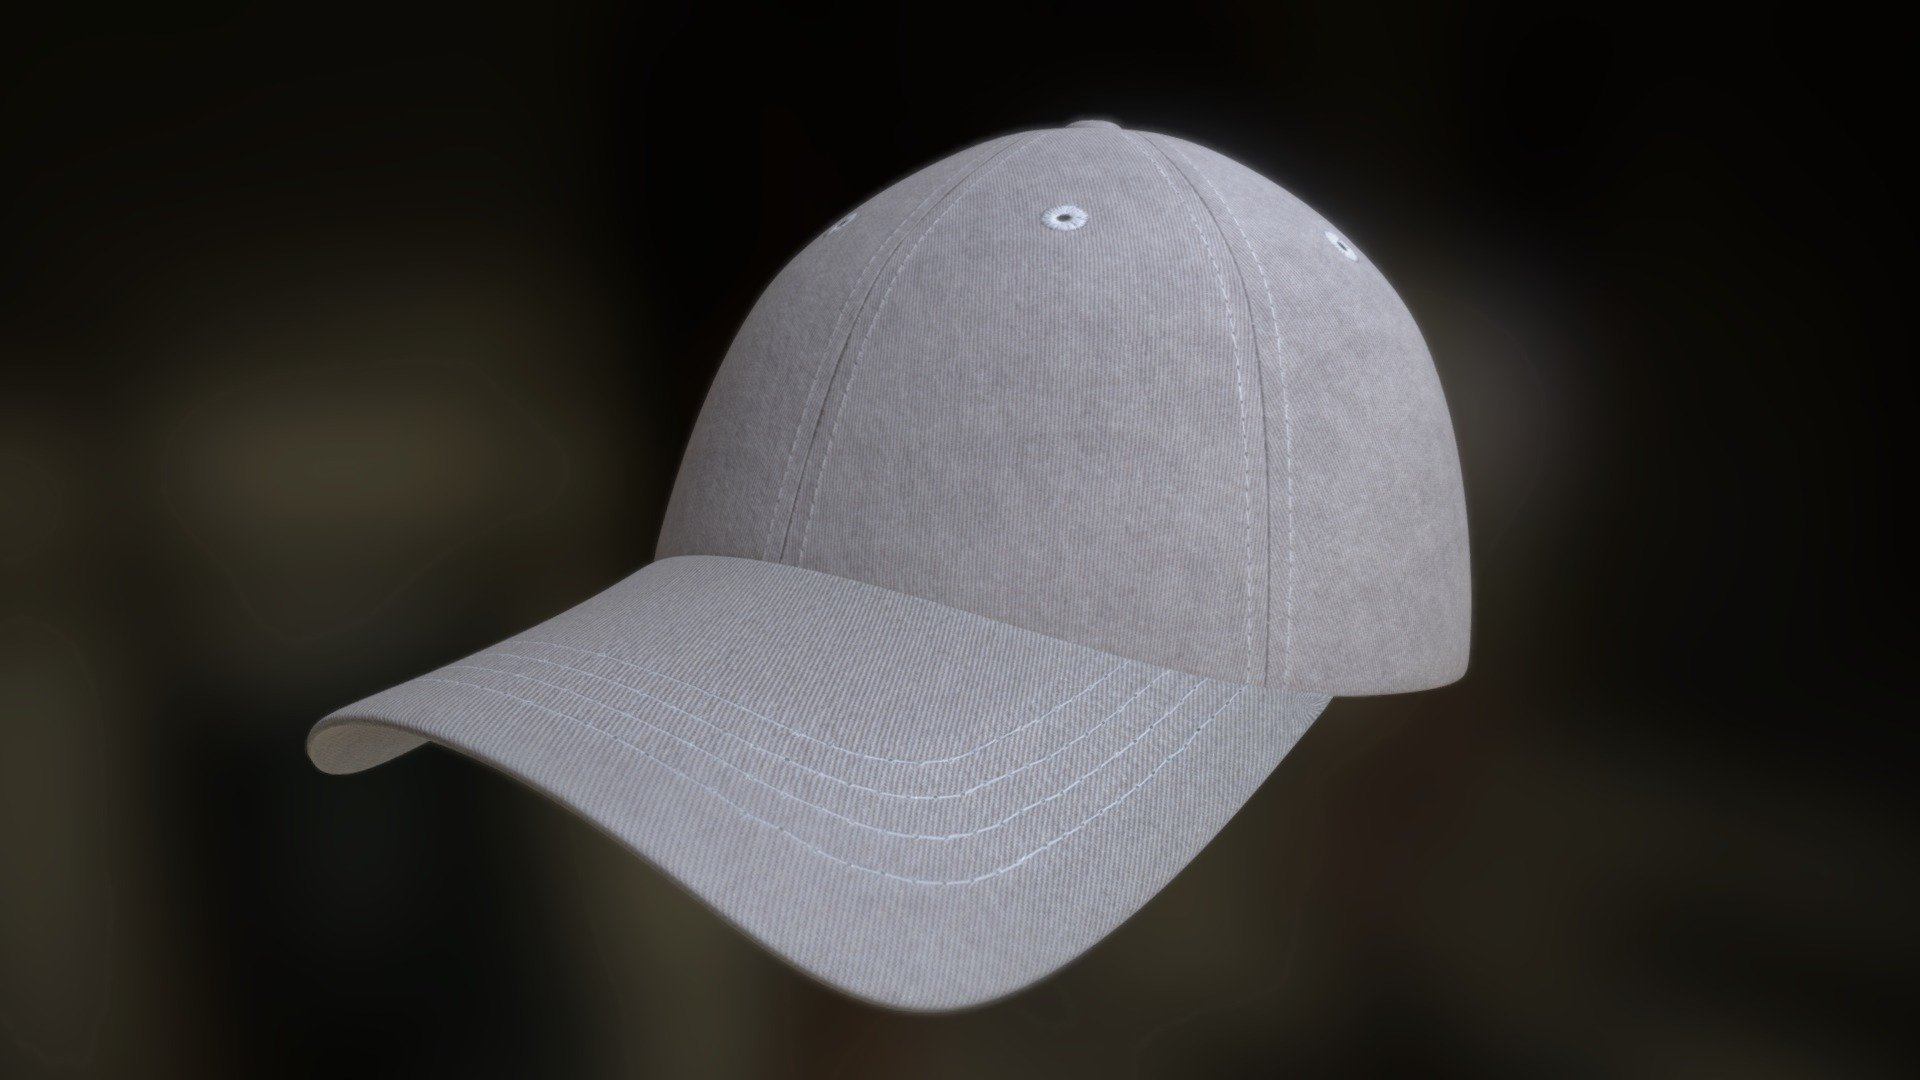 Baseball cap created to test out photoshop's 3D capbilities 3d model